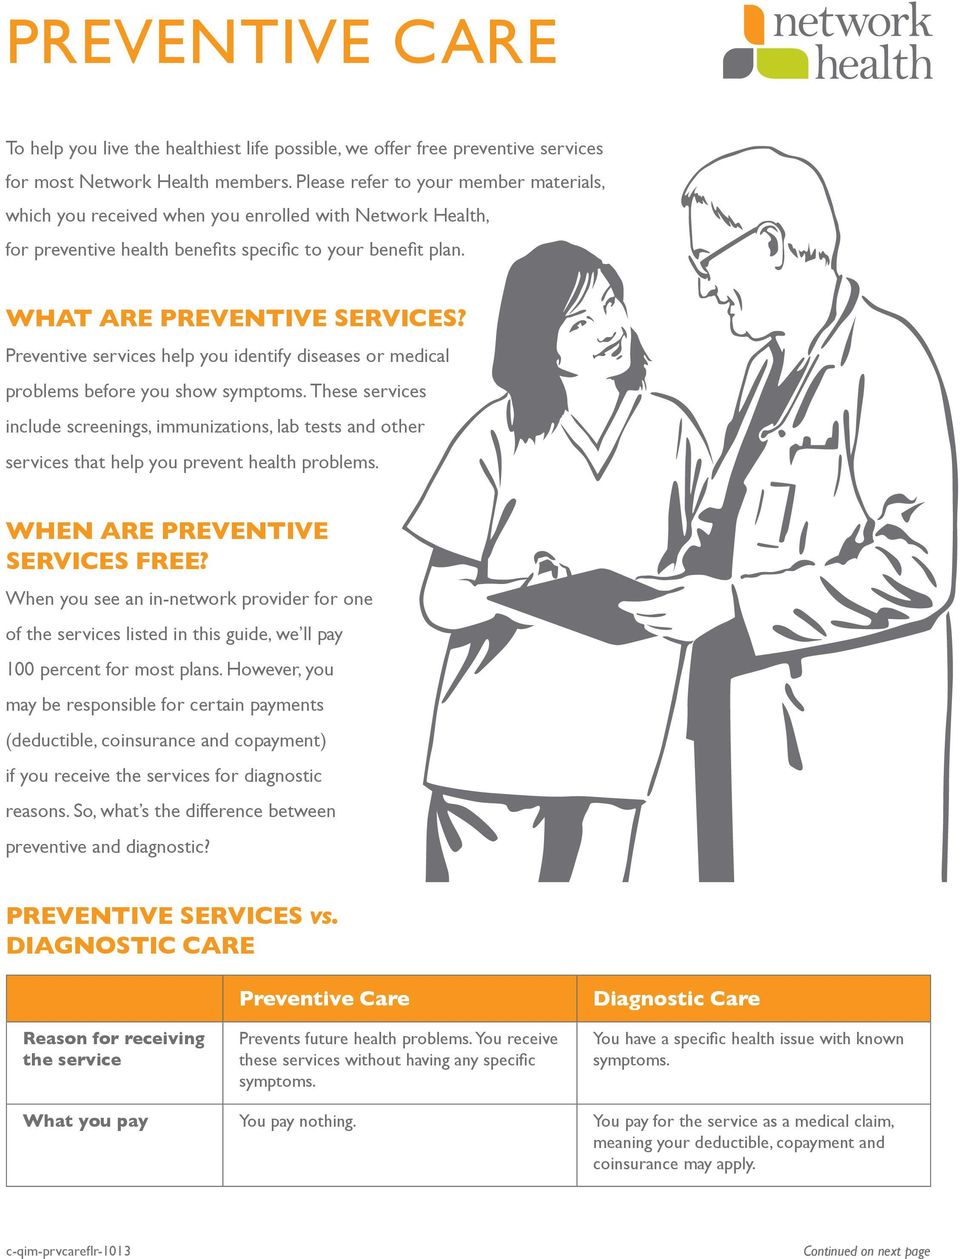 Preventive services help you identify diseases or medical problems before you show symptoms.